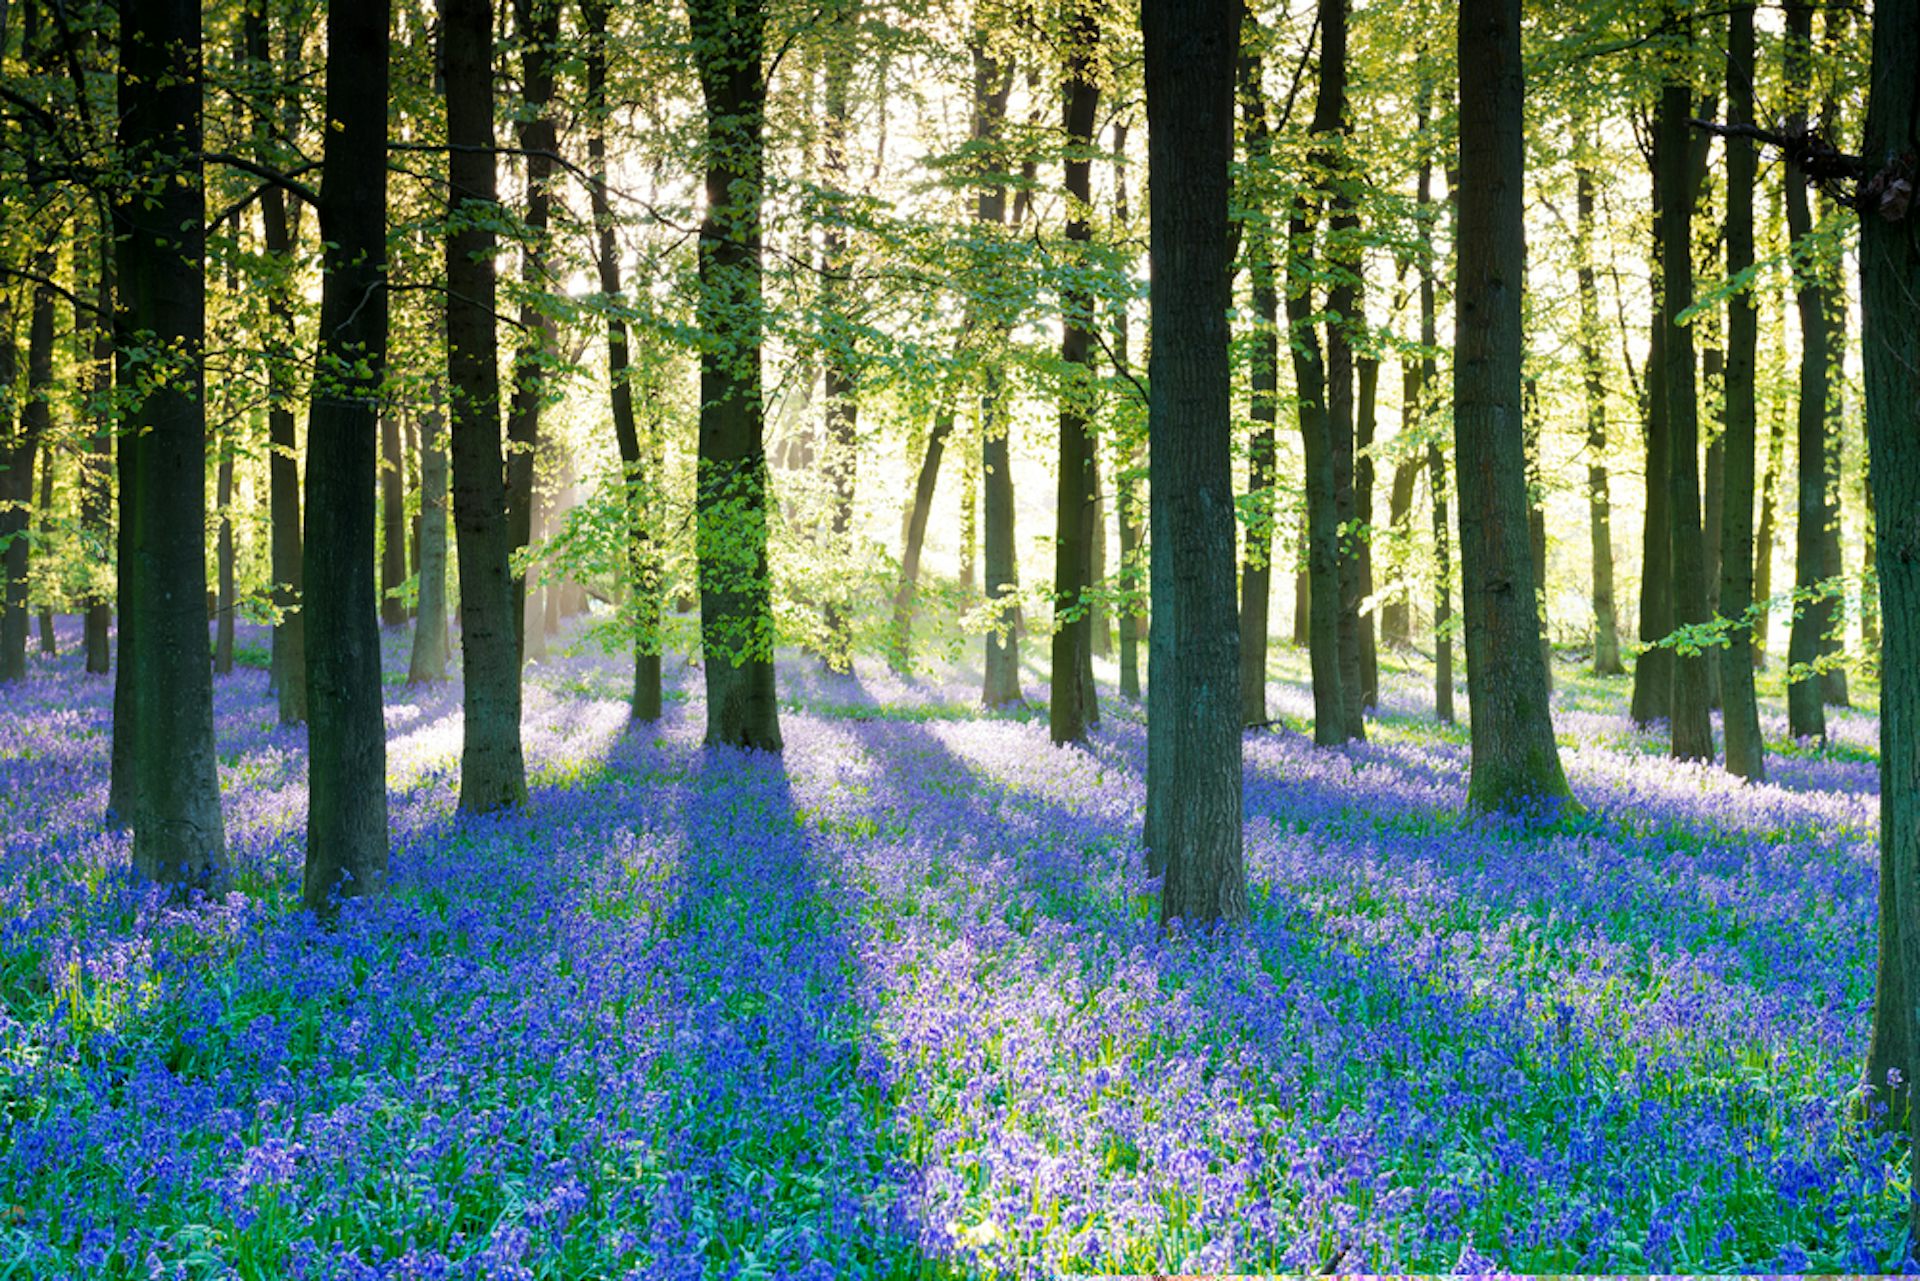 Bloomageddon: seven clever ways bluebells win the woodland turf